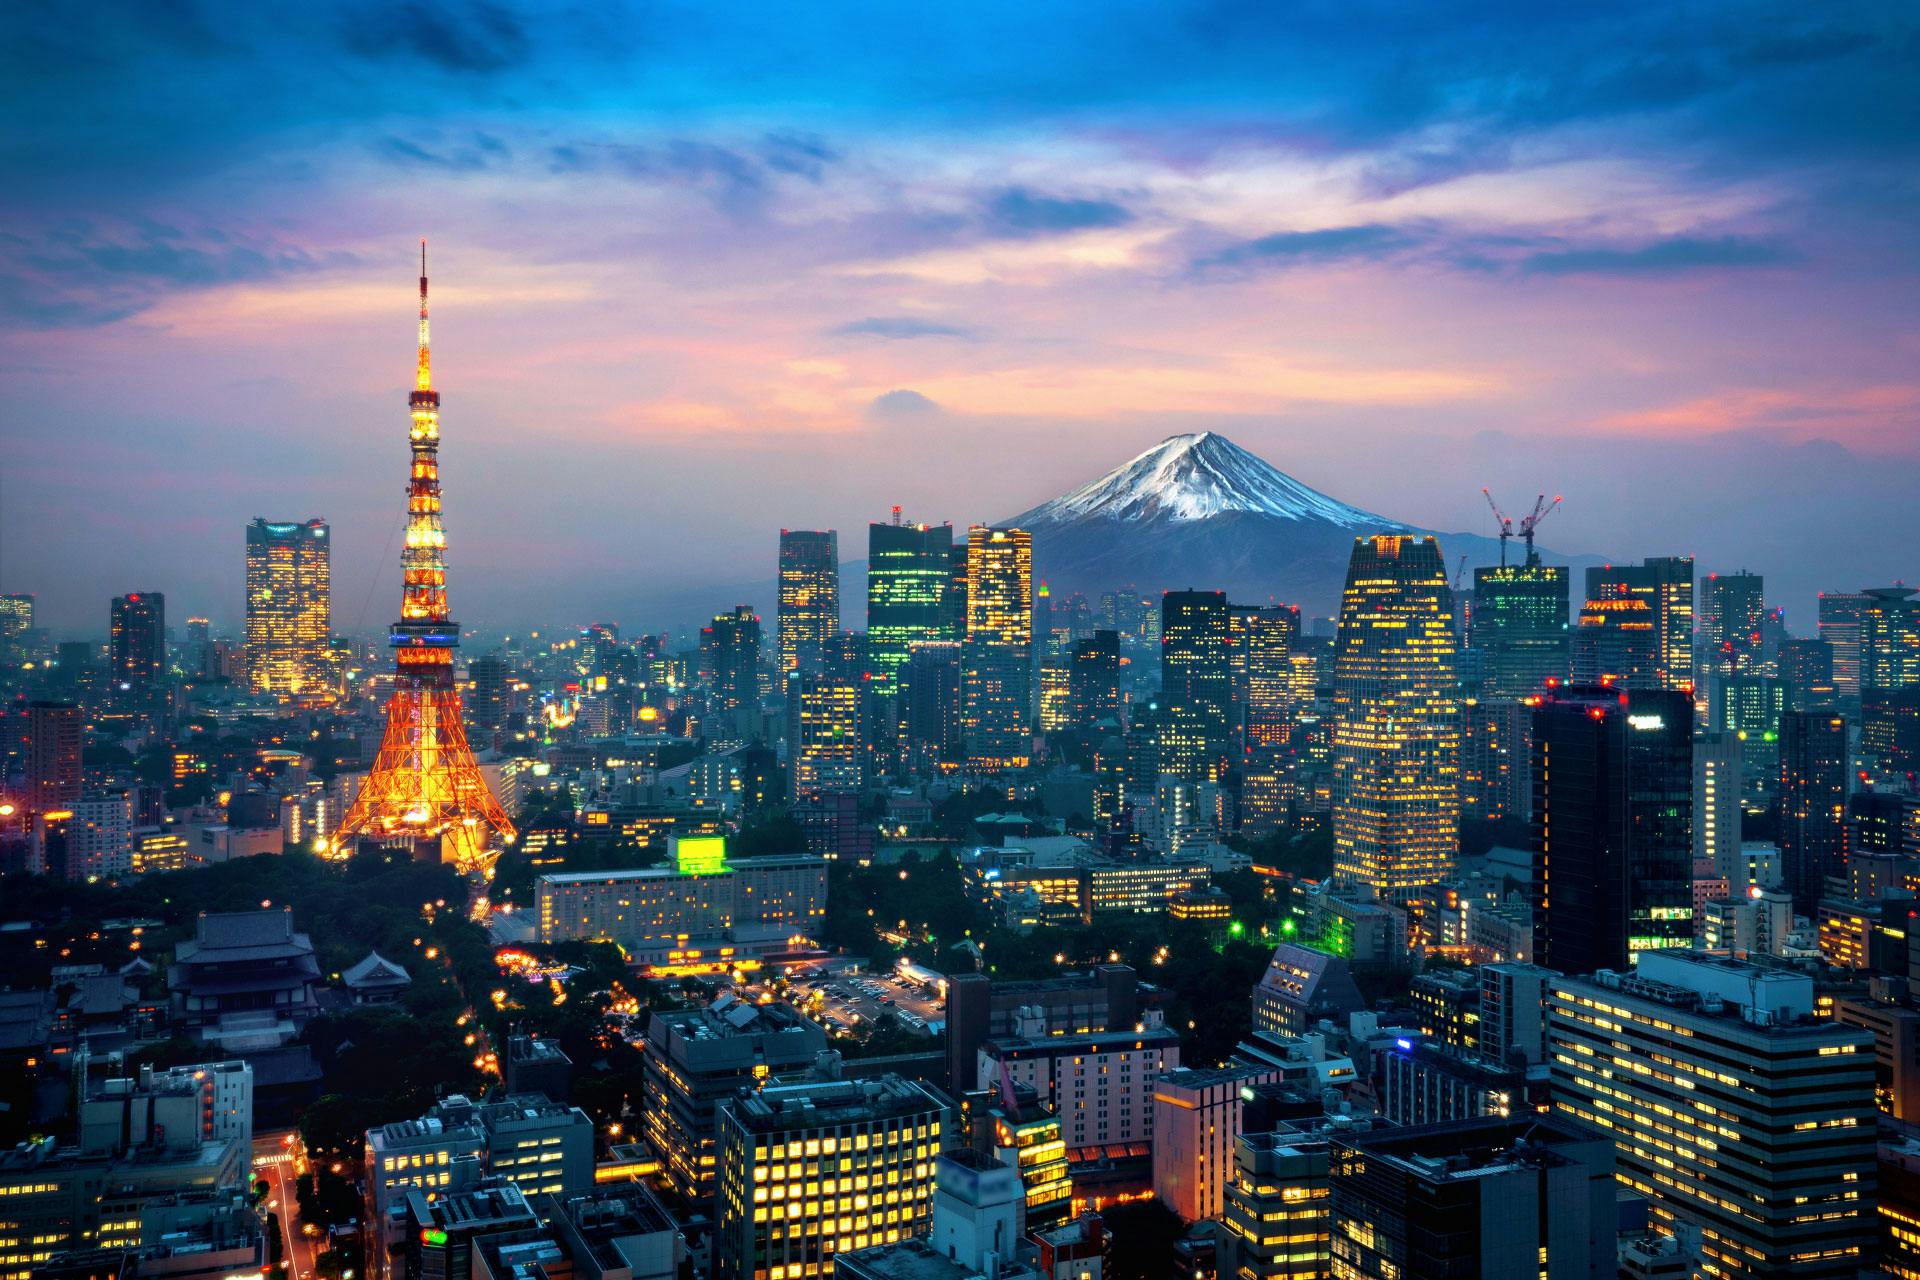 Image of Tokyo, Japan cityscape with Mount Fuji in the background